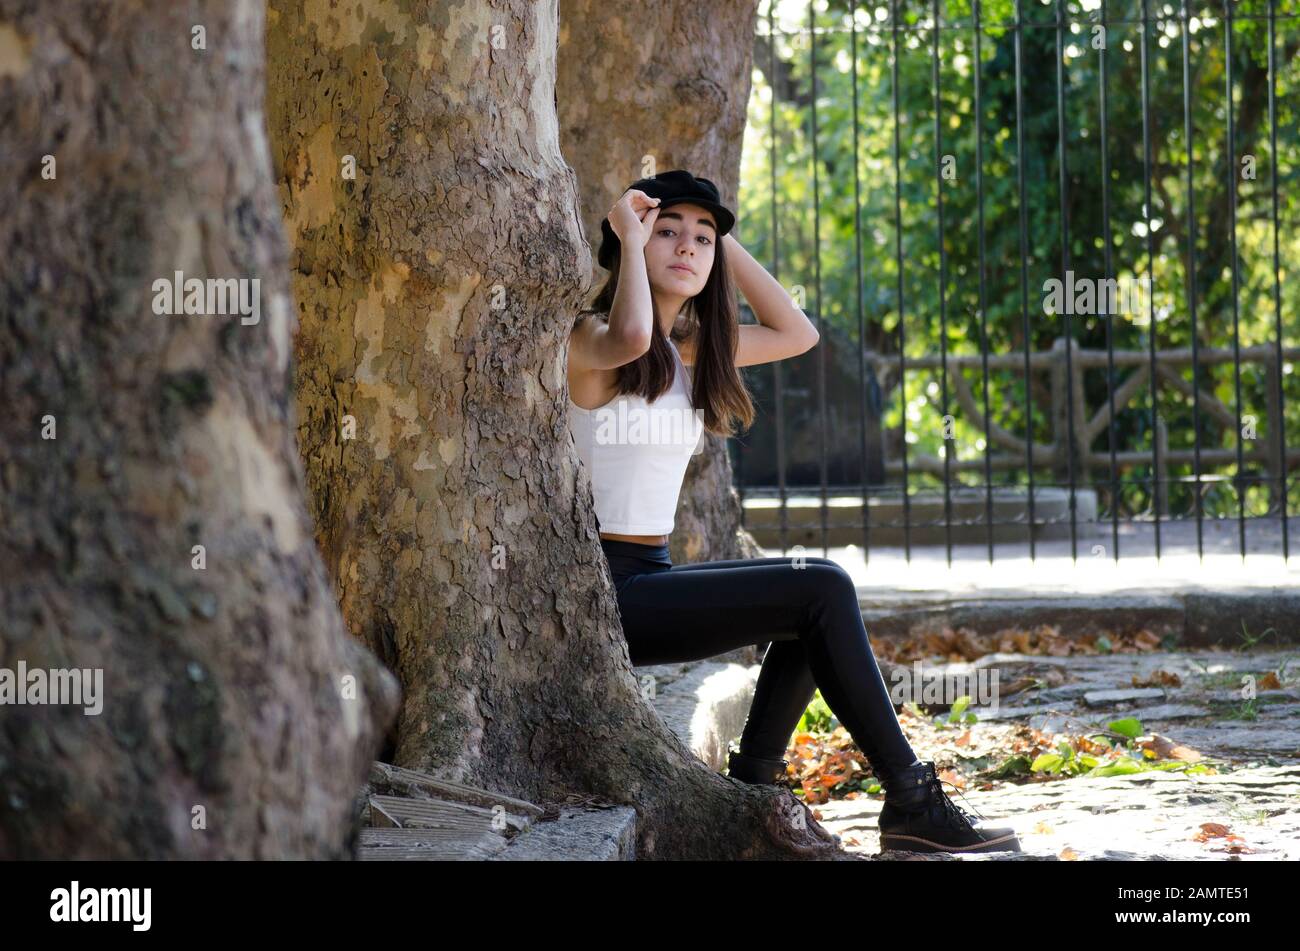 Teenage girl sitting on the curb between trees, Argentina Stock Photo